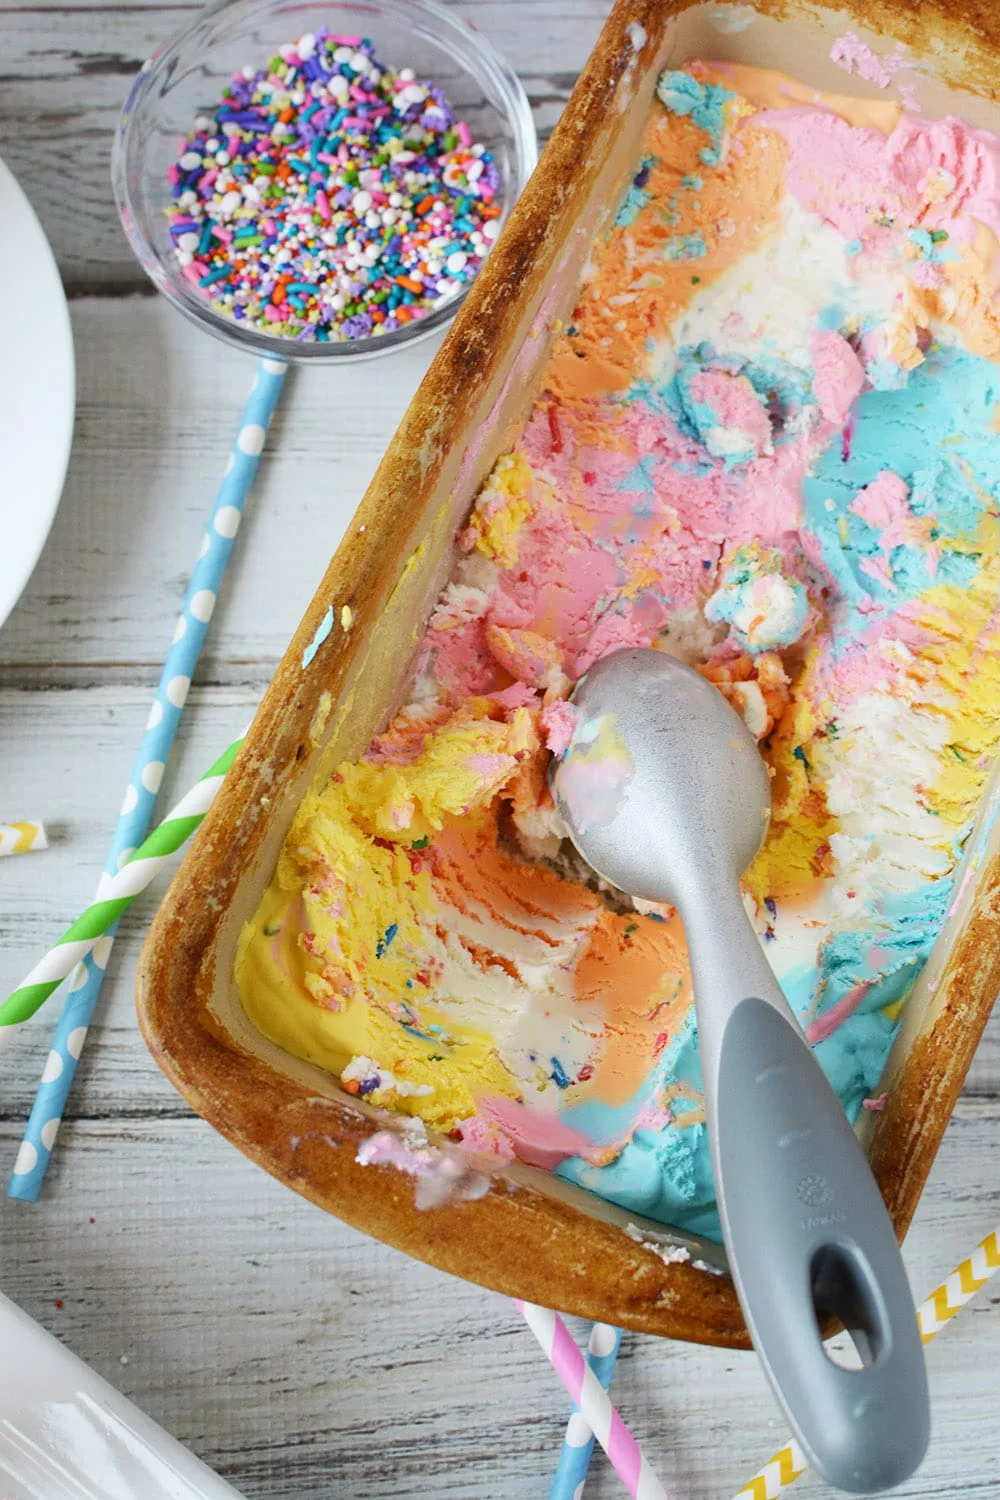 Pan of unicorn ice cream with scoops taken out.